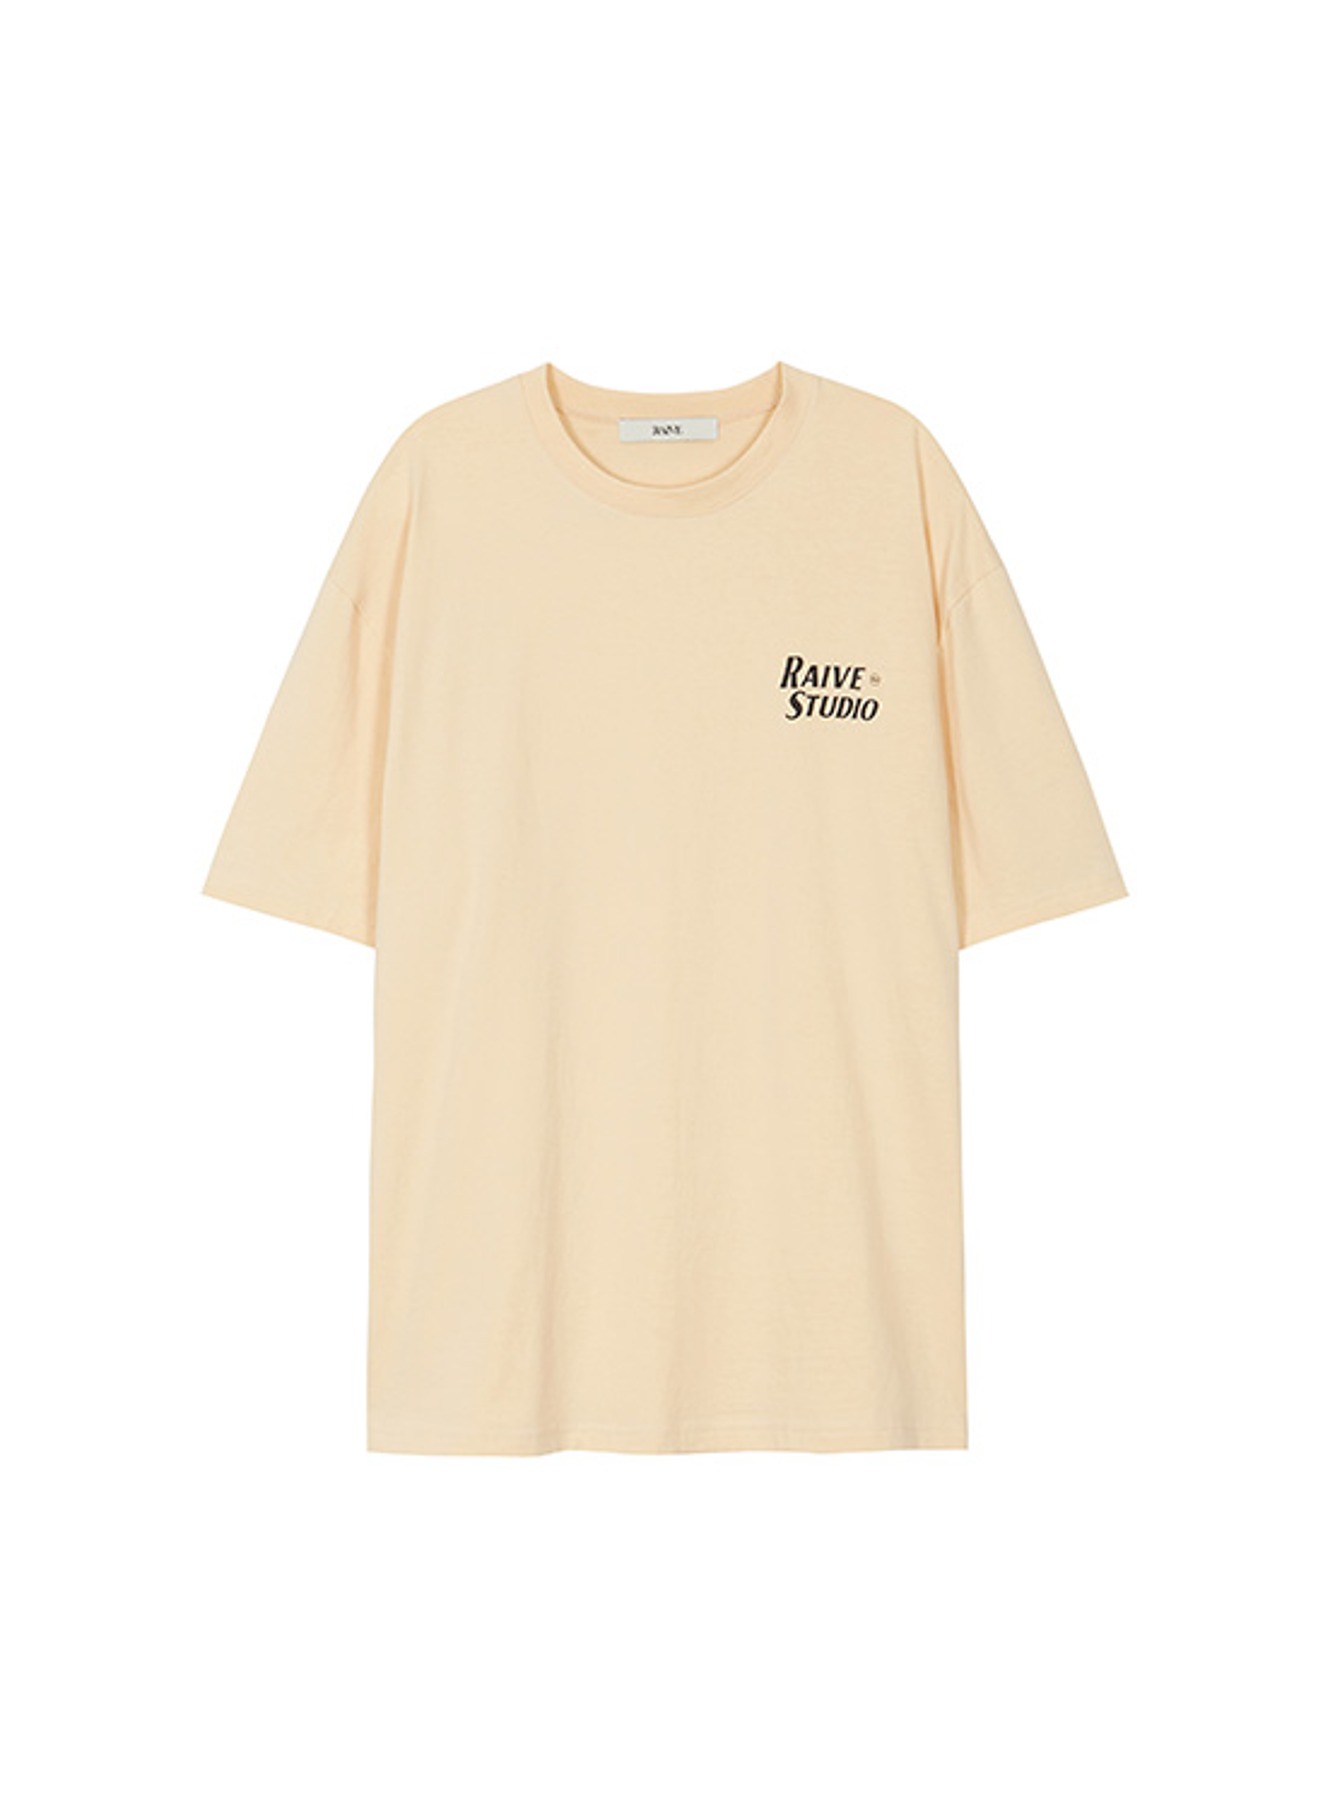 Big Label T-Shirt in Yellow VW3ME891-52